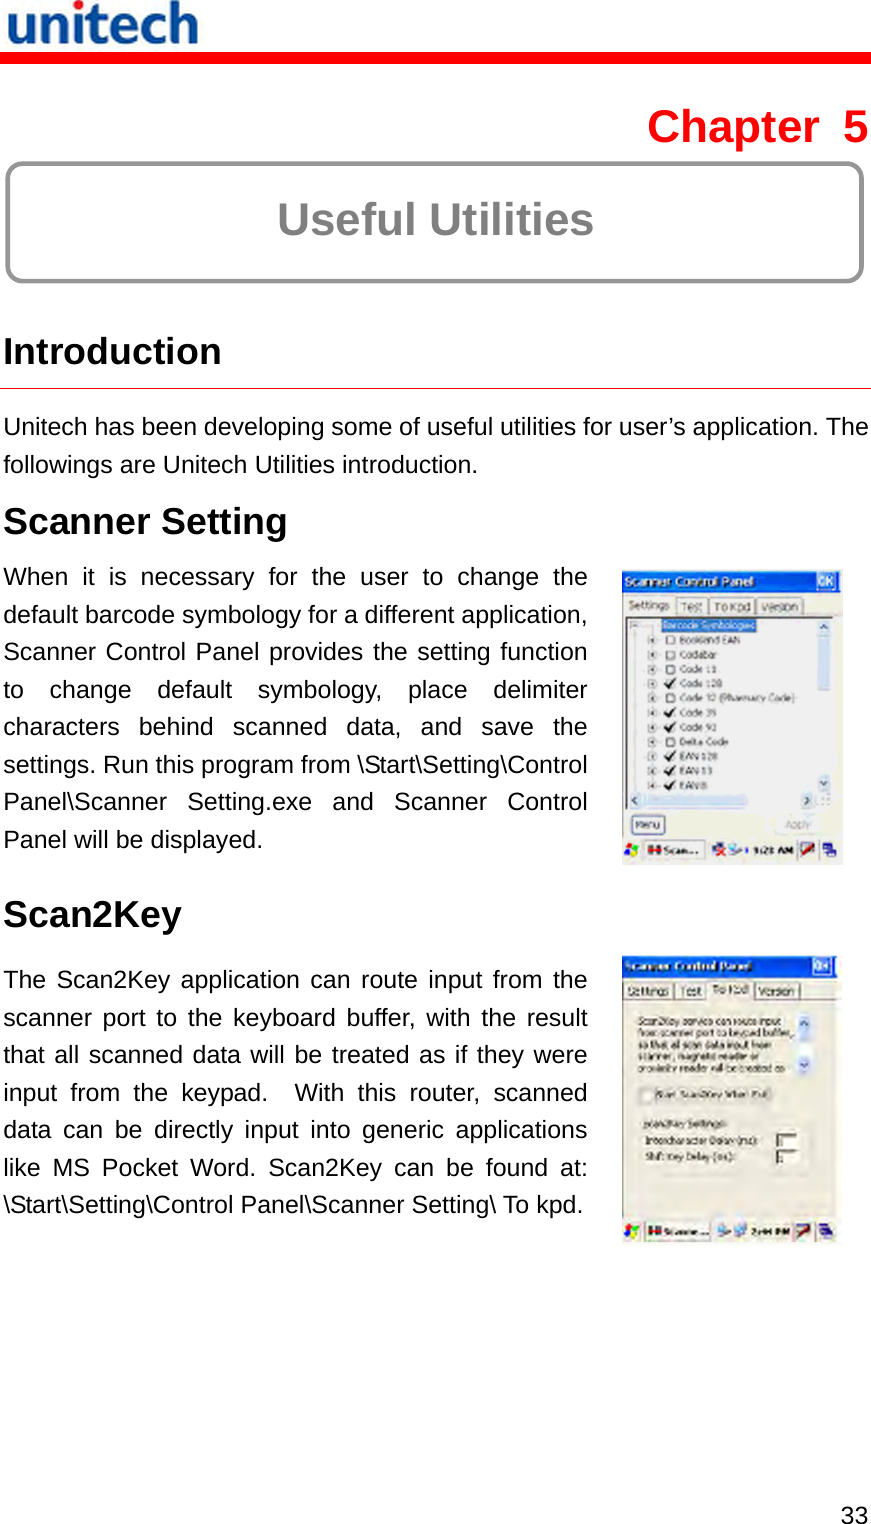   33 Chapter 5  Useful Utilities  Introduction Unitech has been developing some of useful utilities for user’s application. The followings are Unitech Utilities introduction. Scanner Setting When it is necessary for the user to change the default barcode symbology for a different application, Scanner Control Panel provides the setting function to change default symbology, place delimiter characters behind scanned data, and save the settings. Run this program from \Start\Setting\Control Panel\Scanner Setting.exe and Scanner Control Panel will be displayed.   Scan2Key The Scan2Key application can route input from the scanner port to the keyboard buffer, with the result that all scanned data will be treated as if they were input from the keypad.  With this router, scanned data can be directly input into generic applications like MS Pocket Word. Scan2Key can be found at: \Start\Setting\Control Panel\Scanner Setting\ To kpd. 